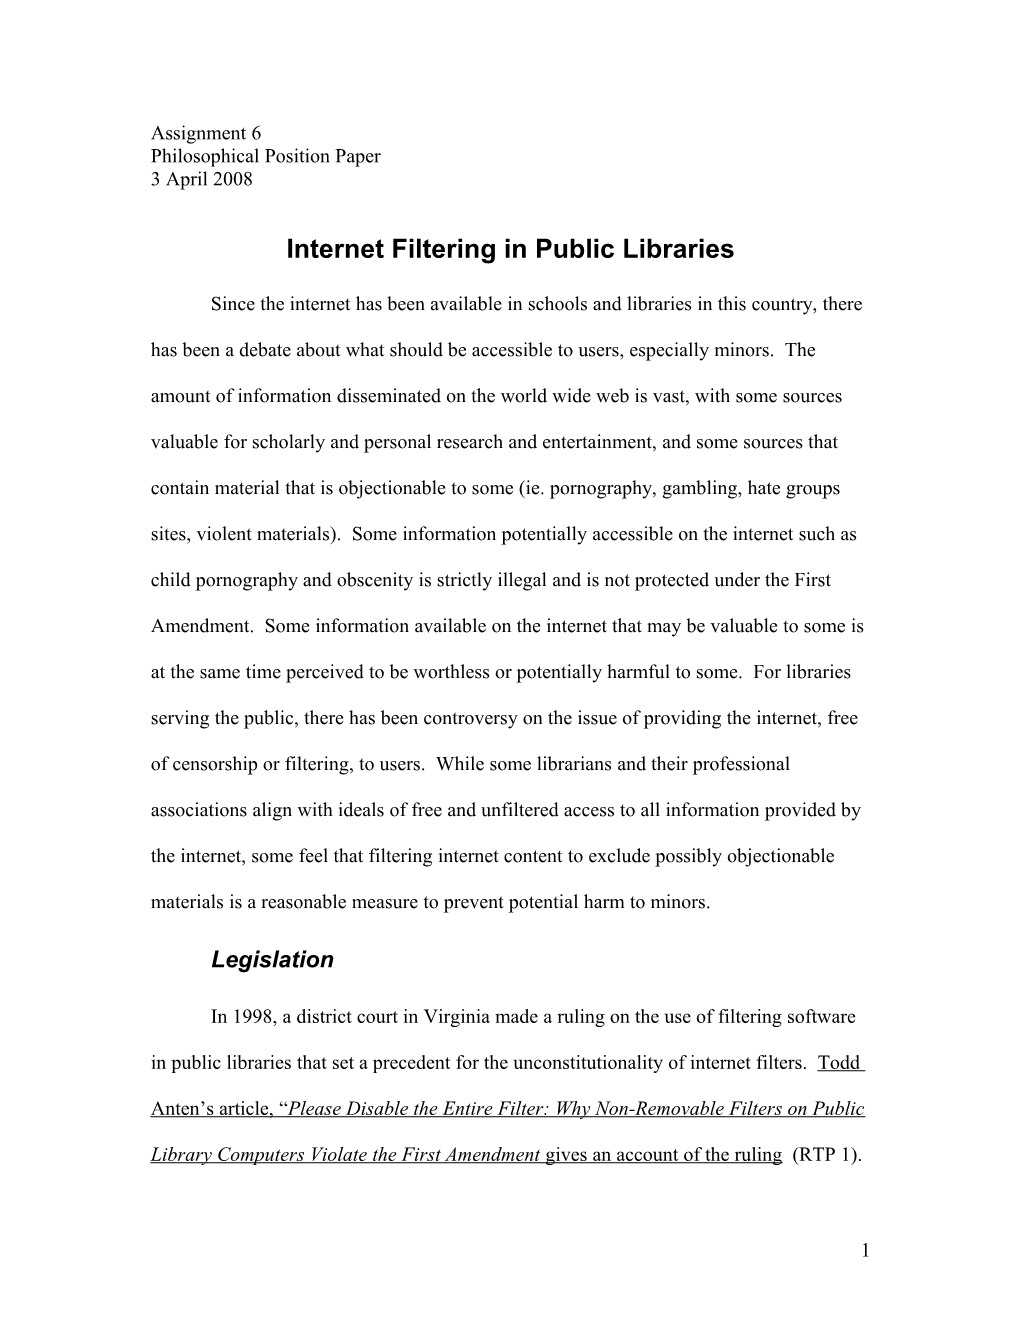 Internet Filtering in Public Libraries